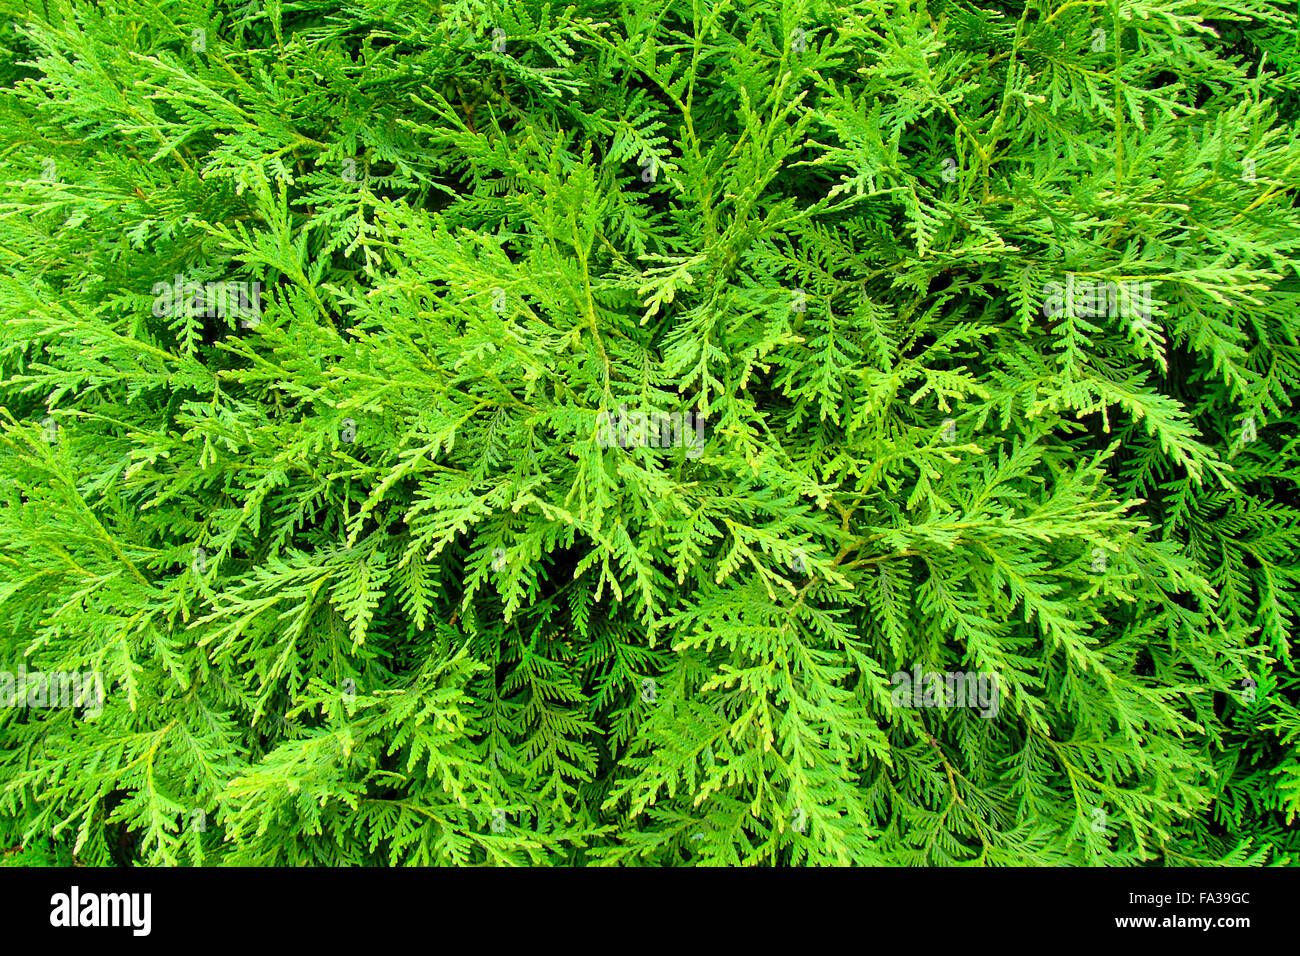 the image shows a green thuja occidentalis background Stock Photo